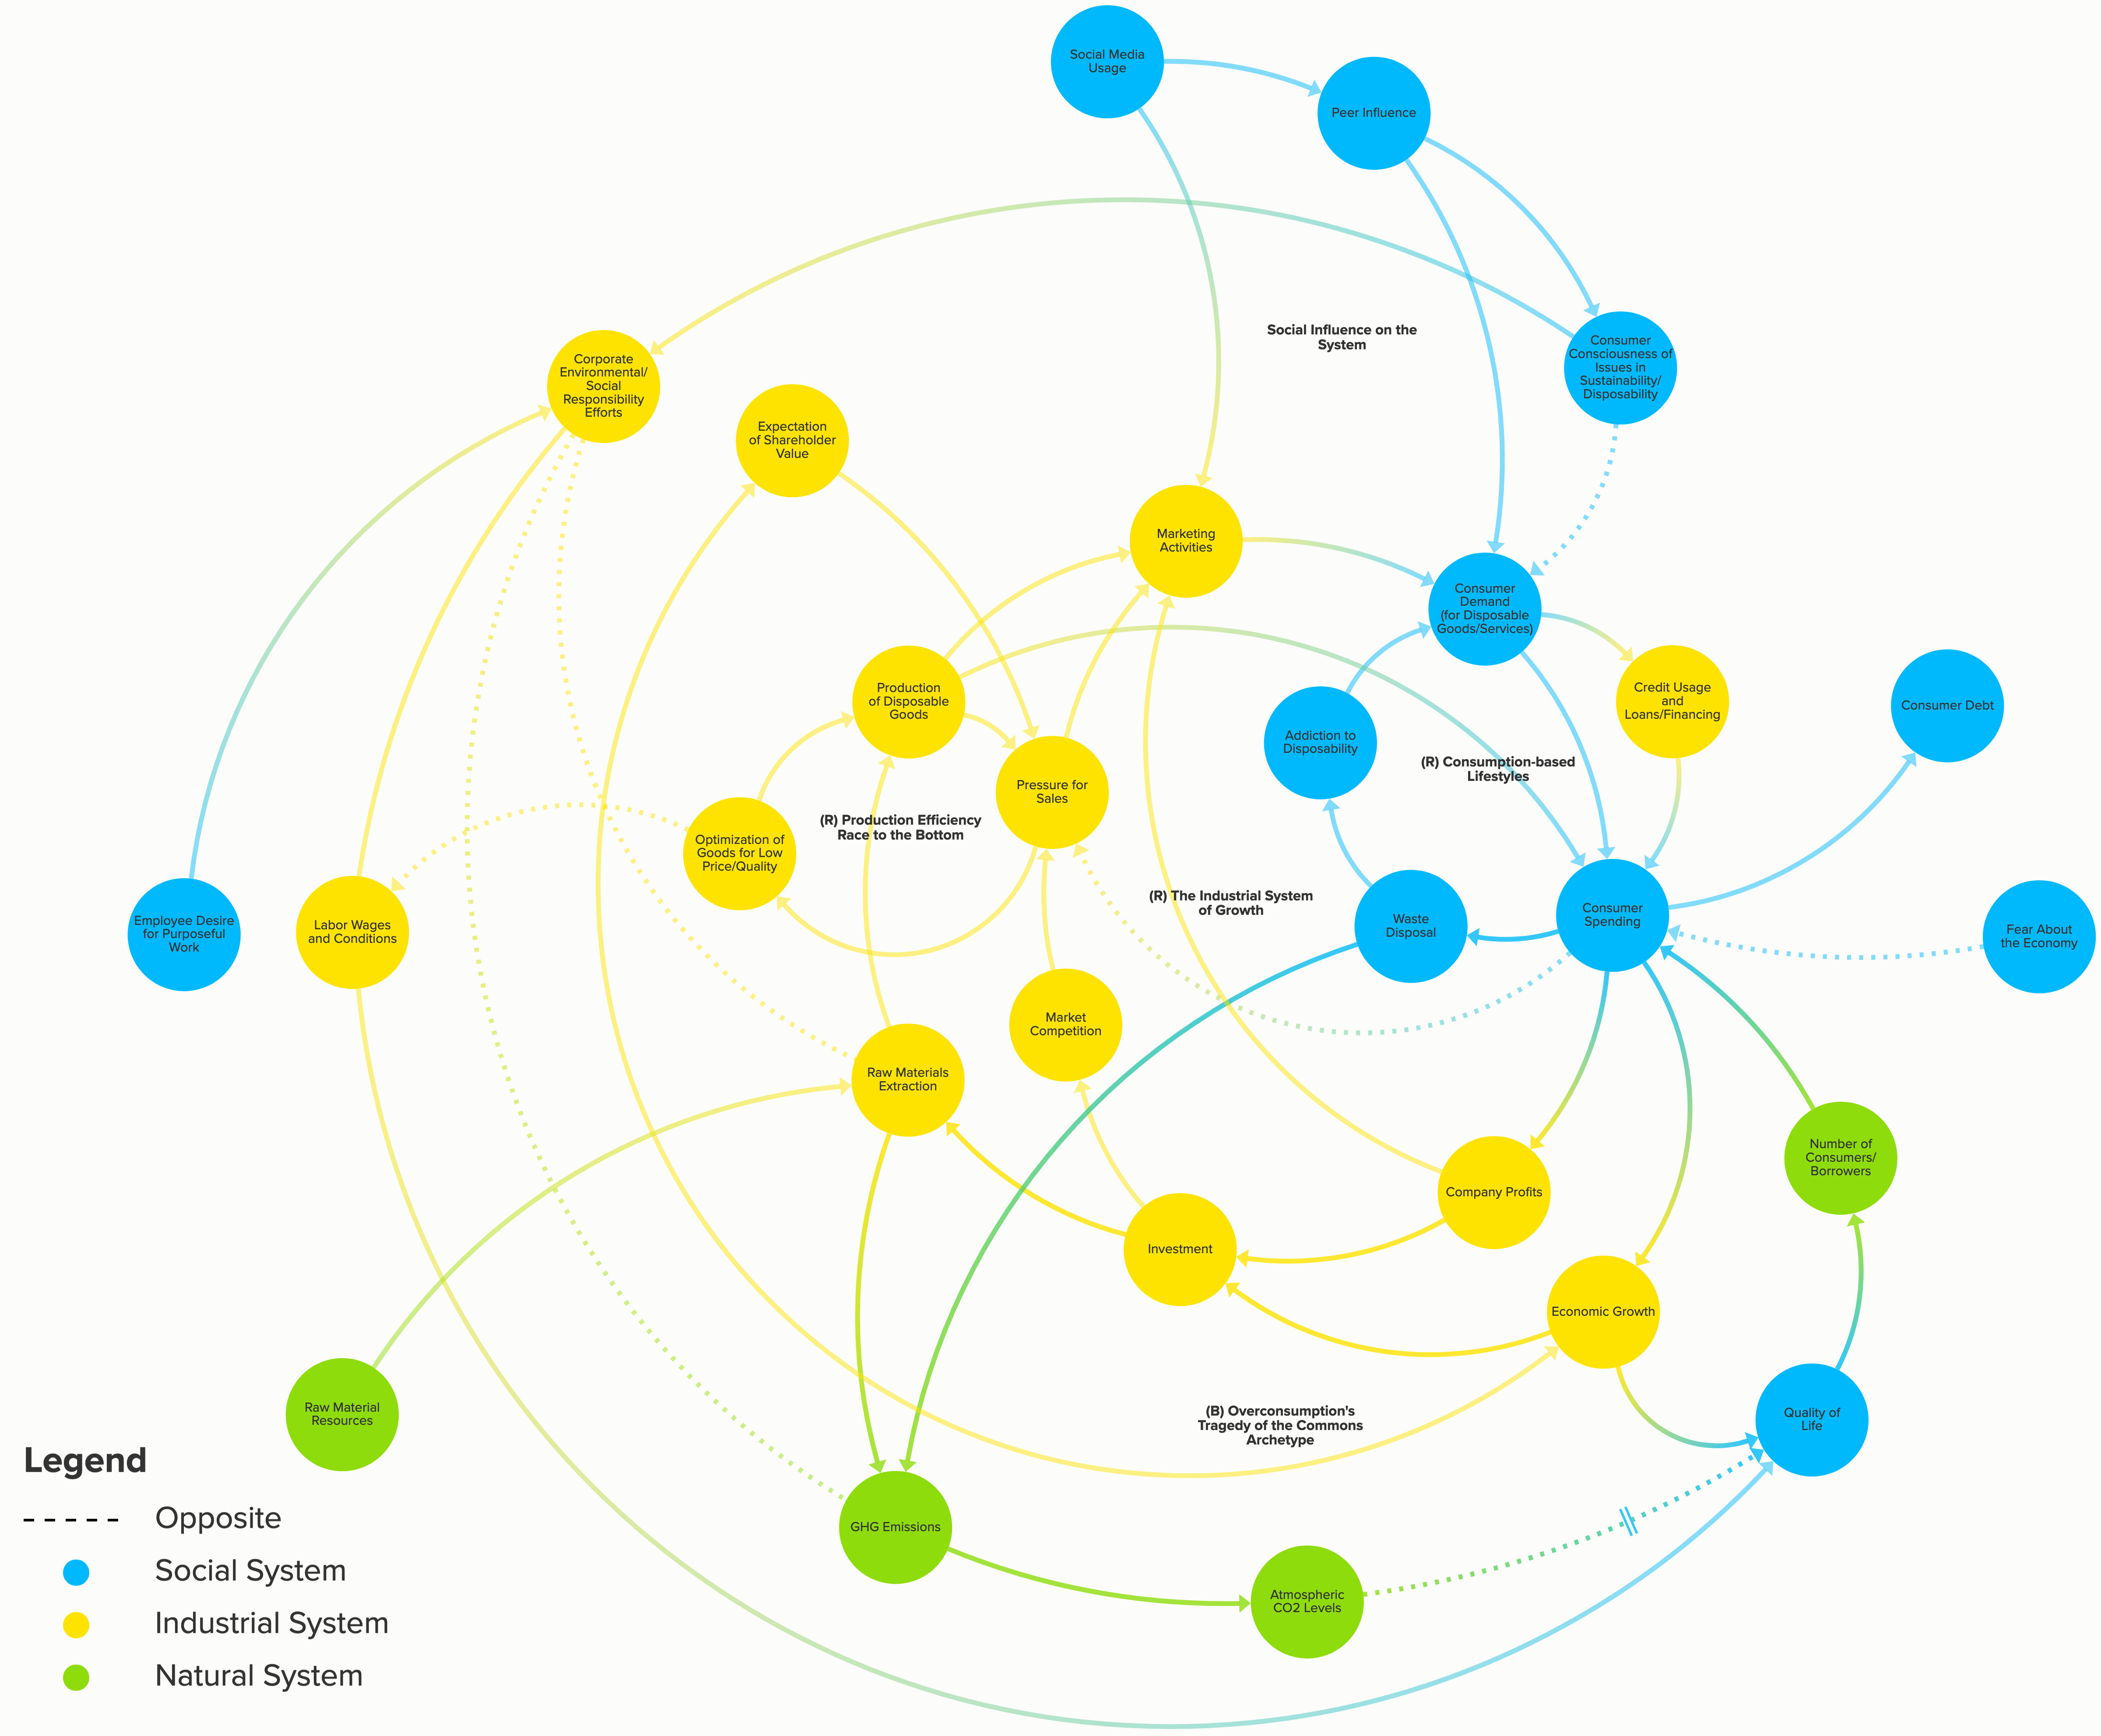 Full System Map of Marketing's Role and Influences in Capitalism